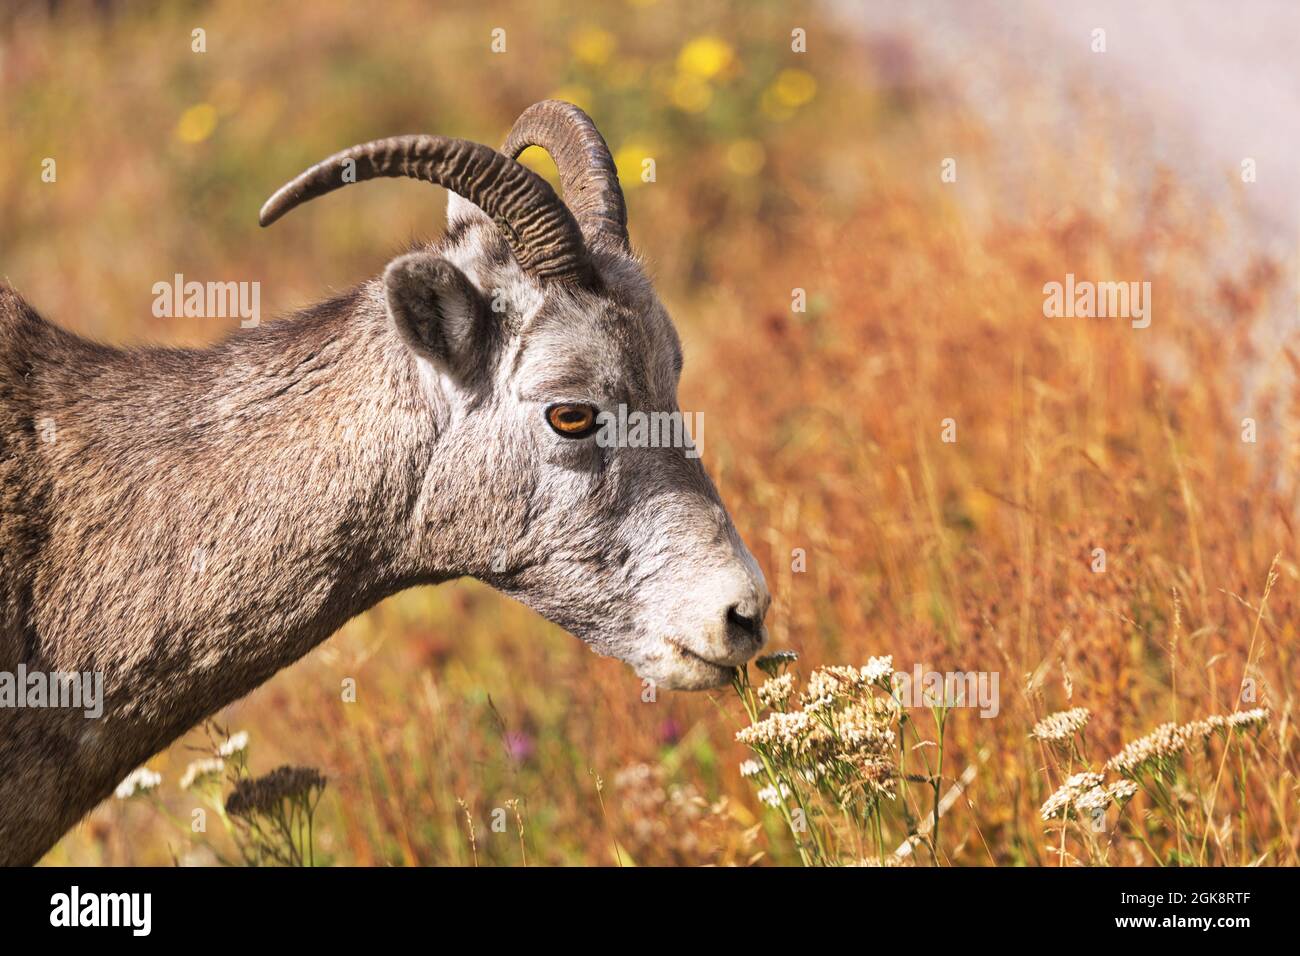 Bighorn sheep nibbles at roadside wildflowers in autumn gold grasses along Maligne Road at Jasper National Park in Alberta, Canada. Stock Photo